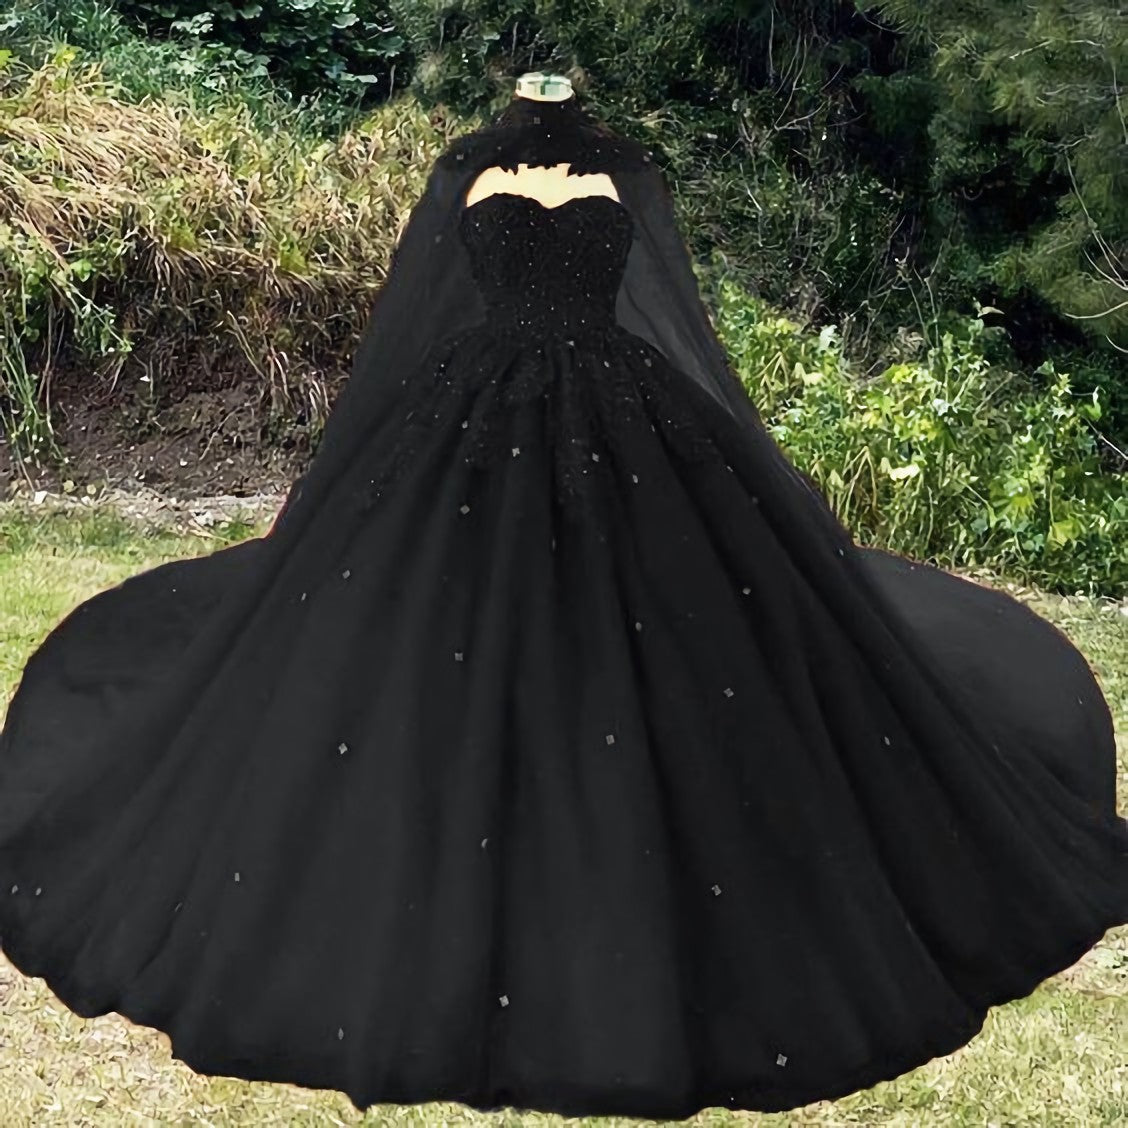 Vintage Black Corset Wedding Dress, Corset Ball Gown For Gothic Weddings With Cape Corset Prom Dress, Evening Dress outfit, Wedding Dress And Shoes